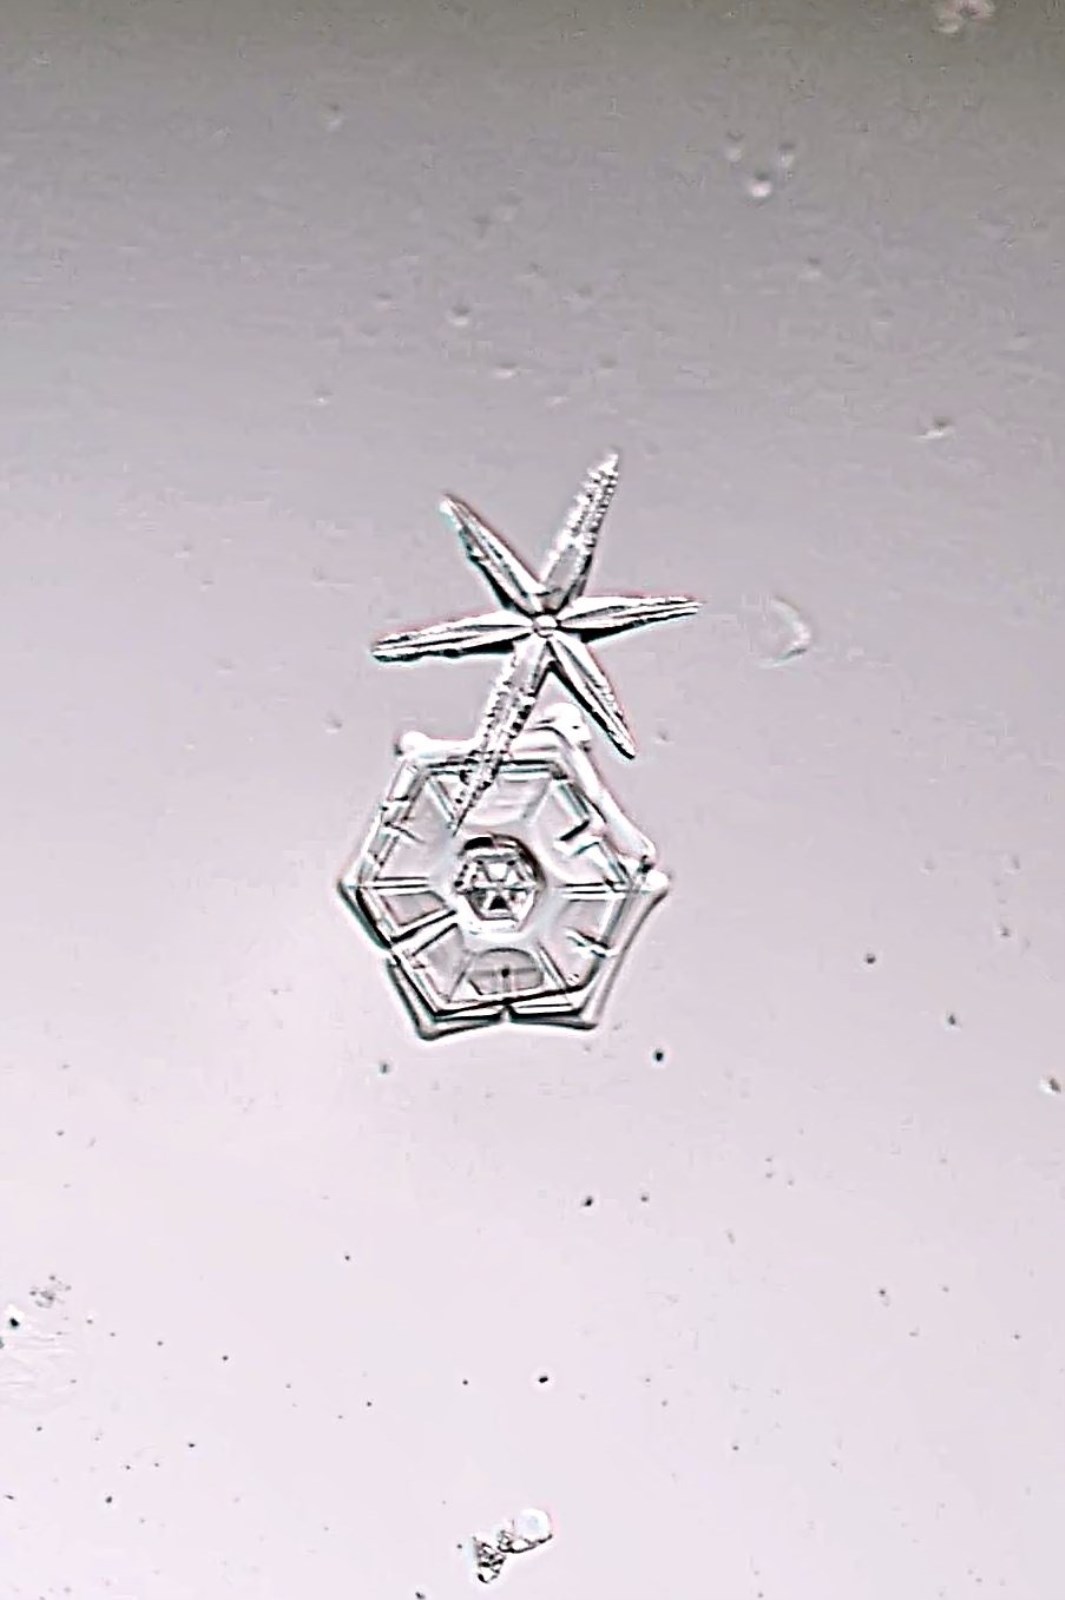 Simple Star and Stellar Plate Snowflakes